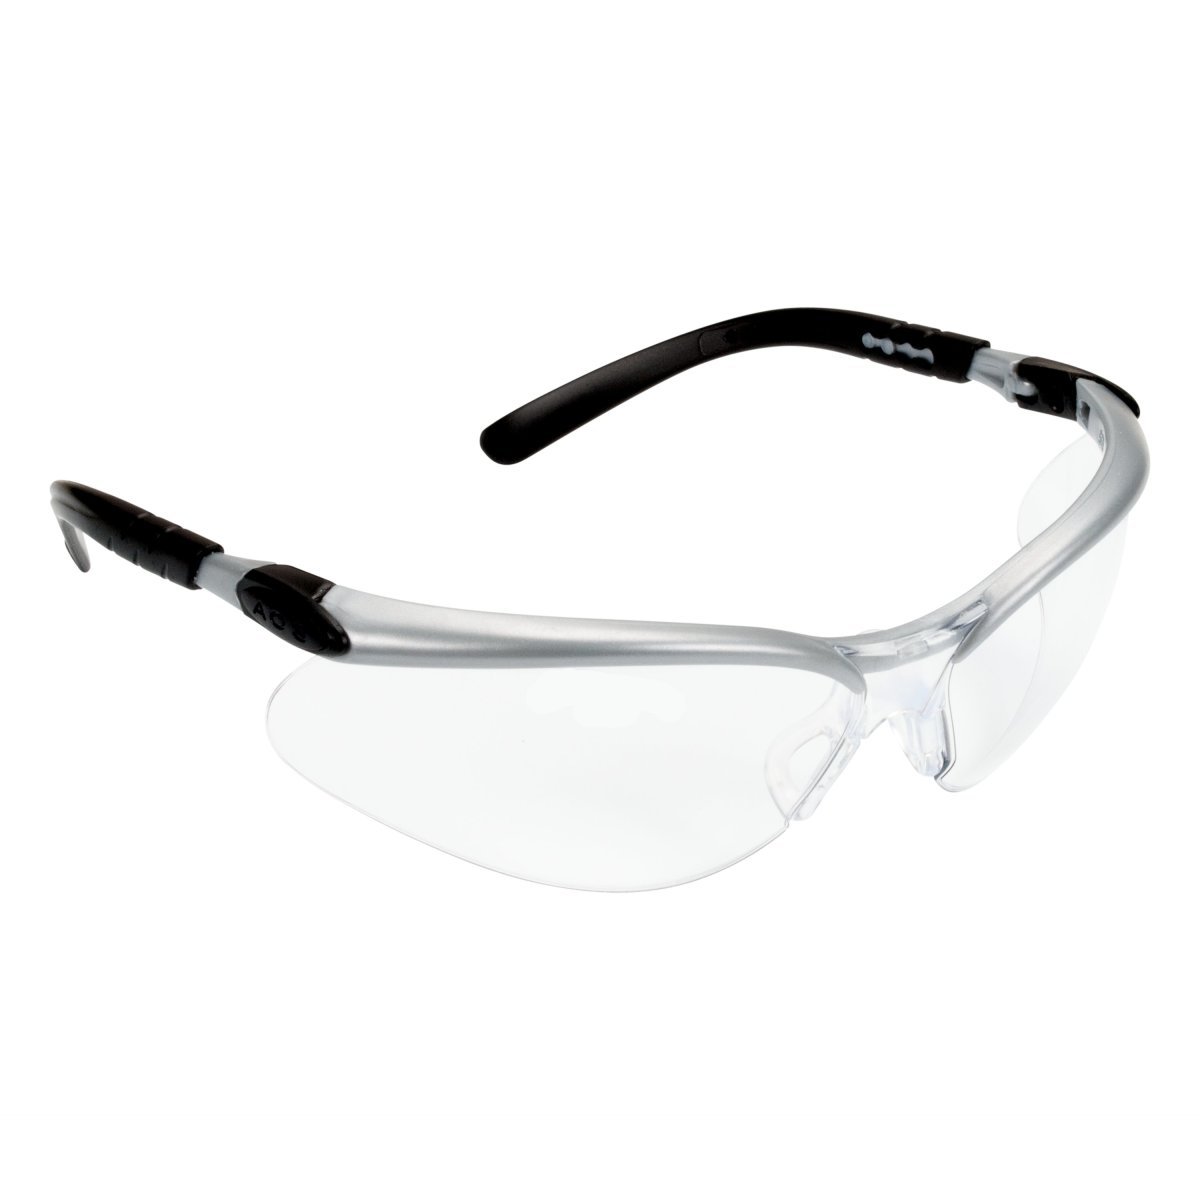 3M™ BX™ Protective Eyewear 11380-00000-20 Clear Anti-Fog Lens, Silver/Black Frame (Availability restrictions apply.)